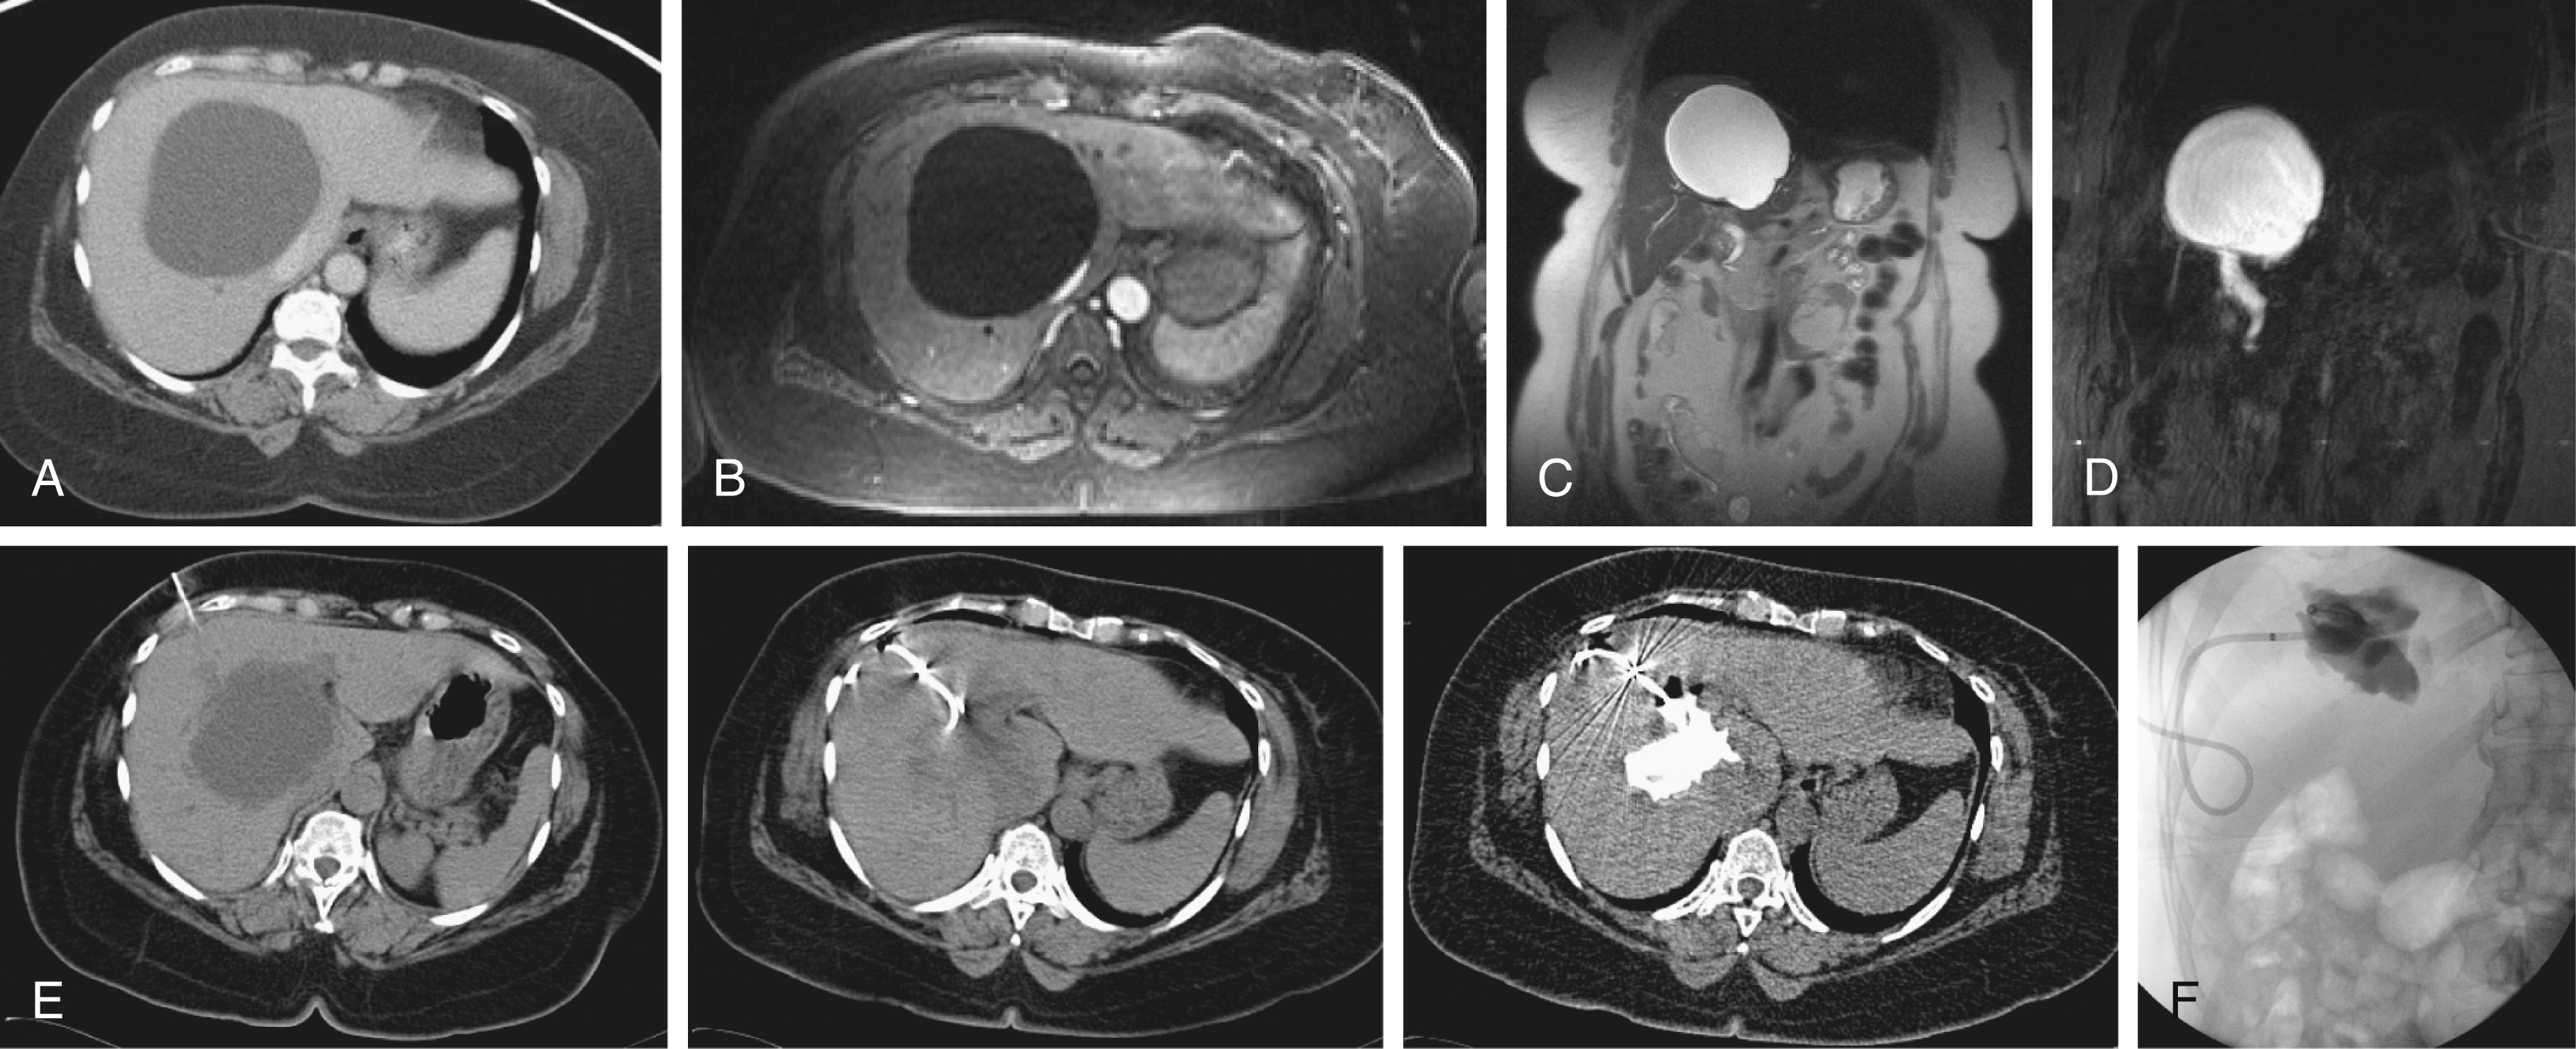 Fig. e99.1, Noncontrast computed tomography (CT) of a 57-year-old woman with biliary obstruction due to a large hepatic cyst. (A) Cyst measures as simple fluid in attenuation. (B) Magnetic resonance three-dimensional volumetric interpolated breath-hold examination postcontrast sequence demonstrates no internal or peripheral cyst enhancement, compatible with simple cyst. Coronal magnetic resonance cholangiopancreatography ([C]) and half-Fourier acquisition single-shot turbo spin-echo ([D]) sequences demonstrate right hepatic lobe biliary dilation distal to cyst. (E) Cyst was successfully drained under CT guidance (three images). (F) Before removal after sclerosis, a cytogram was performed, demonstrating marked decrease in cavity size.